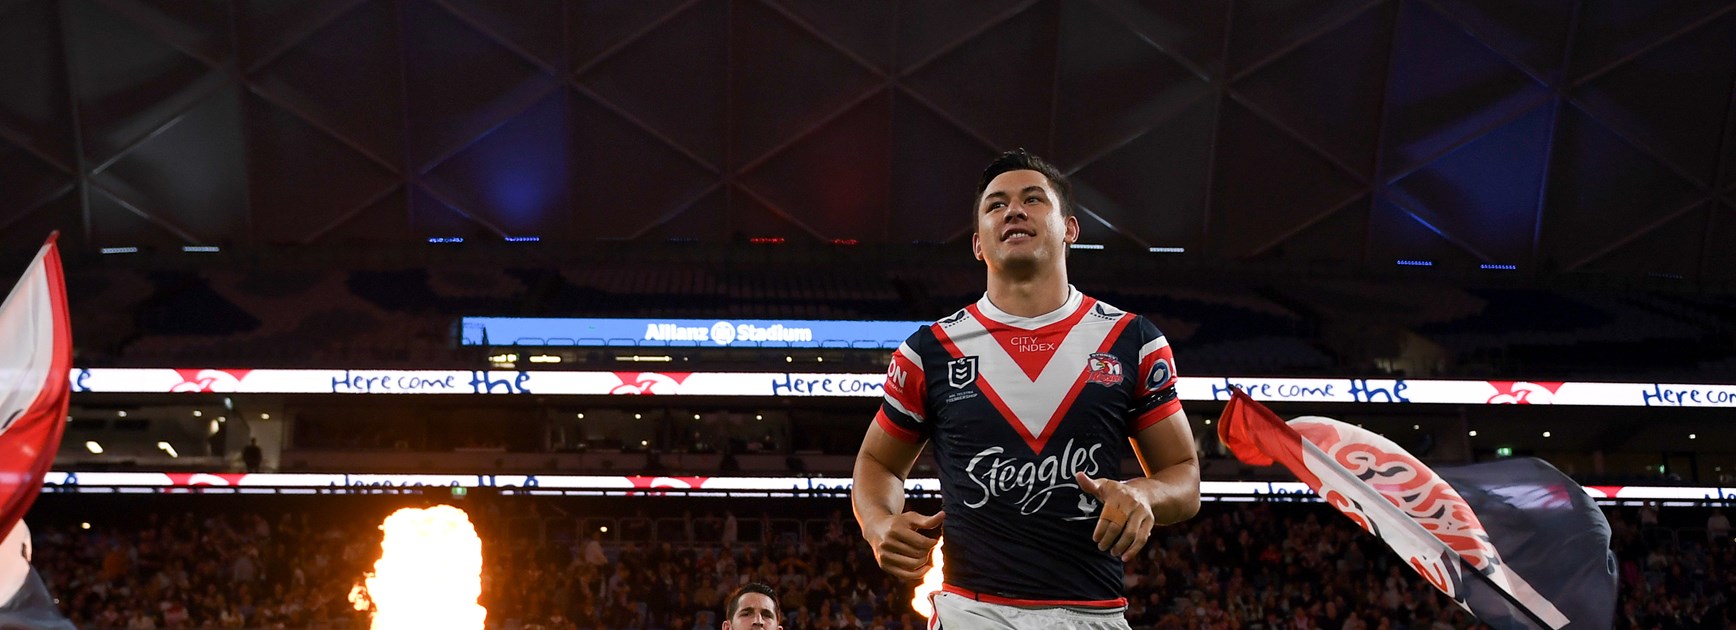 Roosters Honour Manu with Cook Islands Partnership